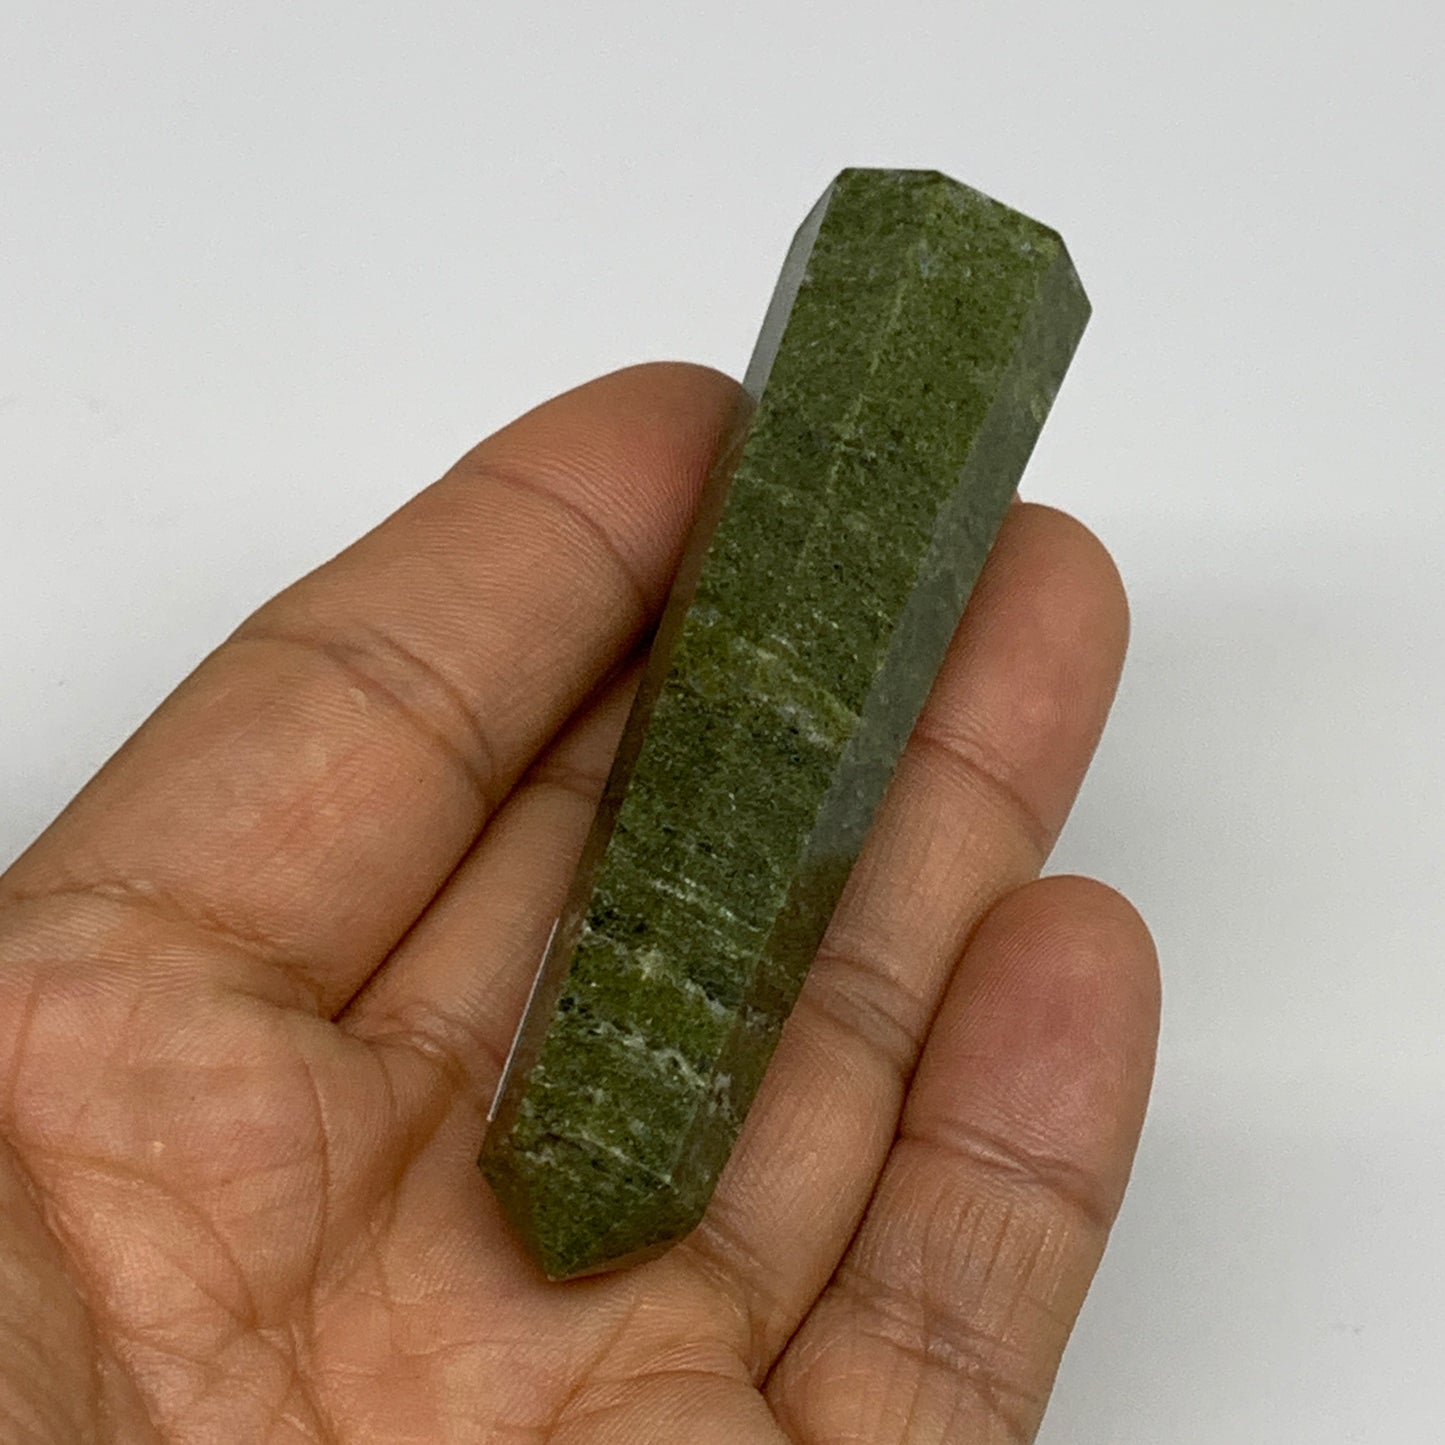 52.9g, 3.2"x0.7",  Natural Vasonite Tower Point Crystal from India, B29327